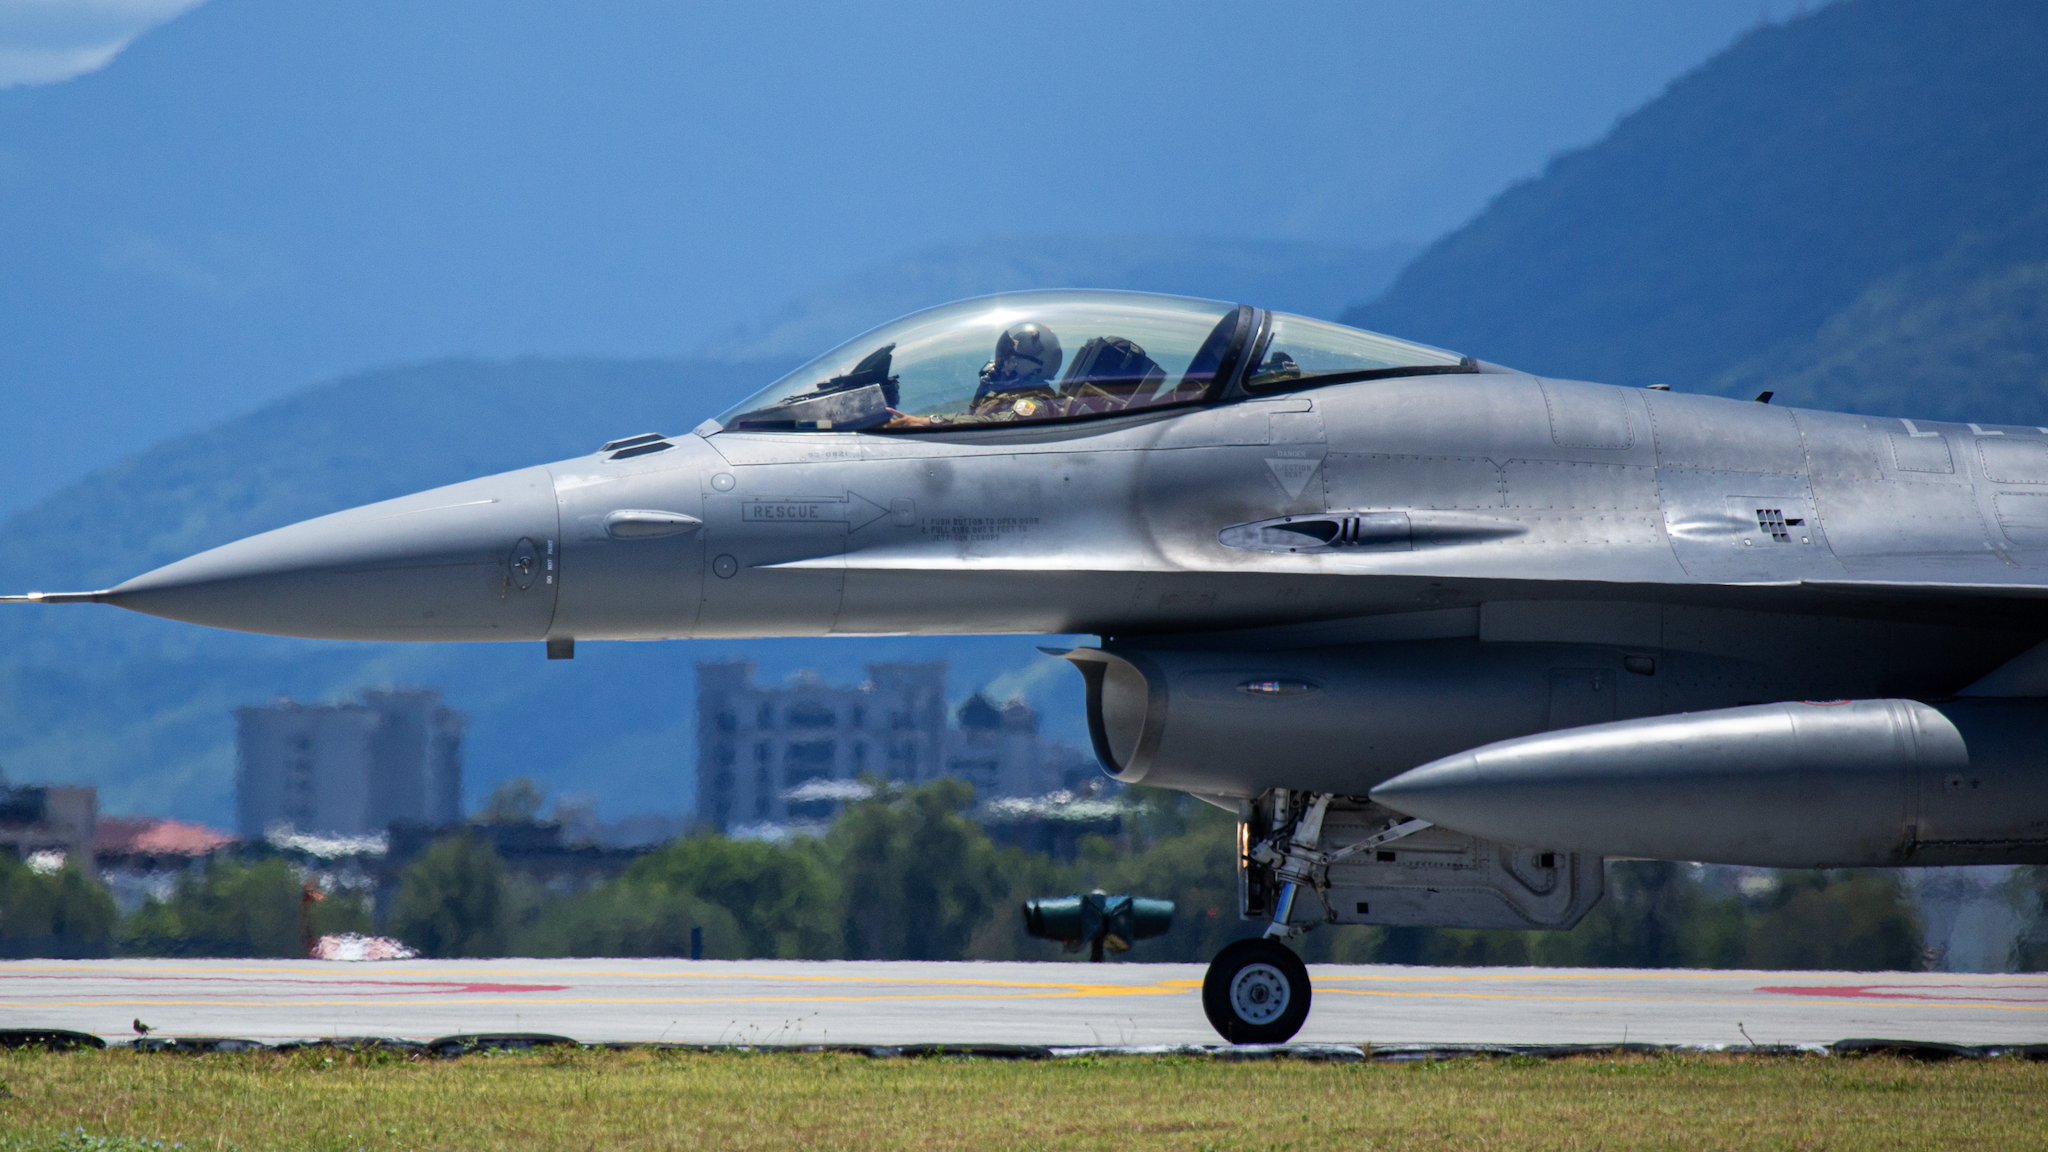 HUALIEN, TAIWAN - AUGUST 06: Taiwanese F-16 Fighting Falcon lands at Hualien Air Force Base on August 06, 2022 in Hualien, Taiwan. Taiwan remained tense after U.S. Speaker of the House Nancy Pelosi (D-CA) visited earlier this week, as part of a tour of Asia aimed at reassuring allies in the region. China has been conducting live-fire drills in waters close to those claimed by Taiwan in response.